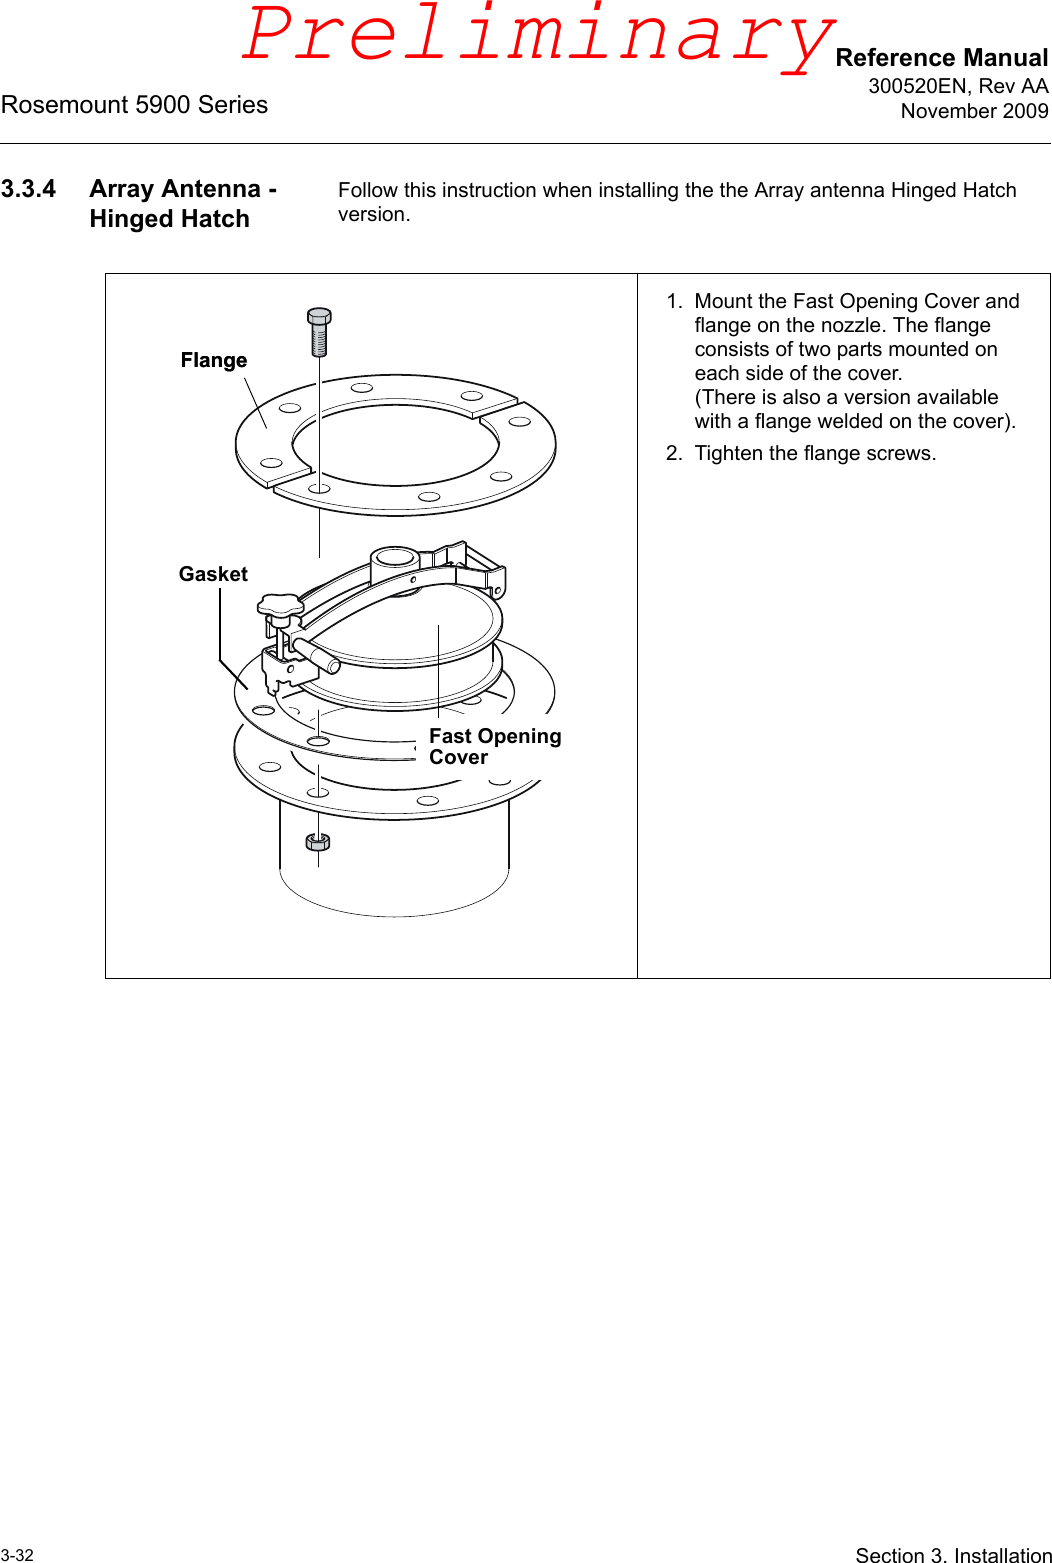 Reference Manual300520EN, Rev AANovember 2009Rosemount 5900 Series3-32 Section 3. Installation3.3.4 Array Antenna - Hinged HatchFollow this instruction when installing the the Array antenna Hinged Hatch version.1. Mount the Fast Opening Cover and flange on the nozzle. The flange consists of two parts mounted on each side of the cover.(There is also a version available with a flange welded on the cover).2. Tighten the flange screws.Fast Opening CoverFlangeFlangeGasketPreliminary